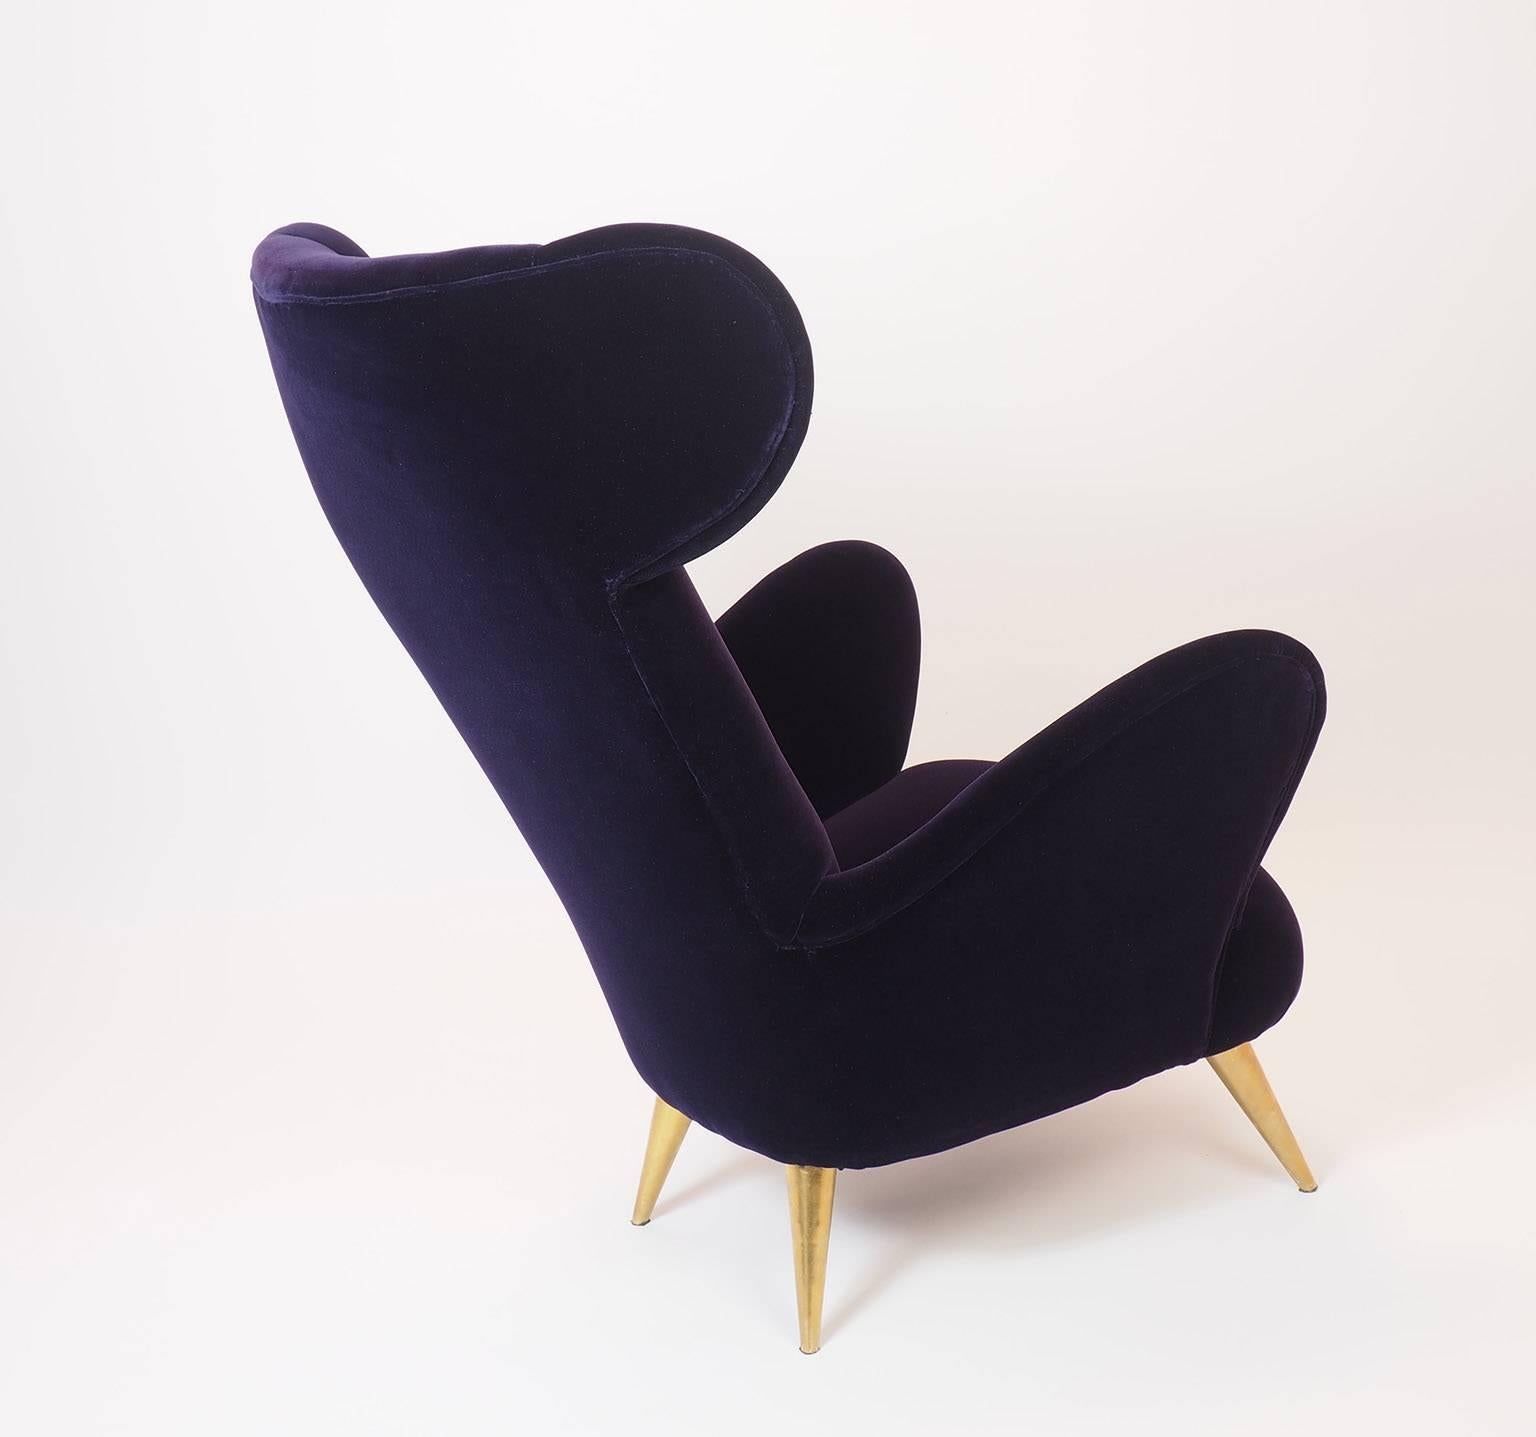 Rare and magnificent vintage armchairs clearly inspired by the world of Carlo Mollino during 1950s in Torino;
this exclusive and unique exemplar of armchairs, express the special manufacture of 